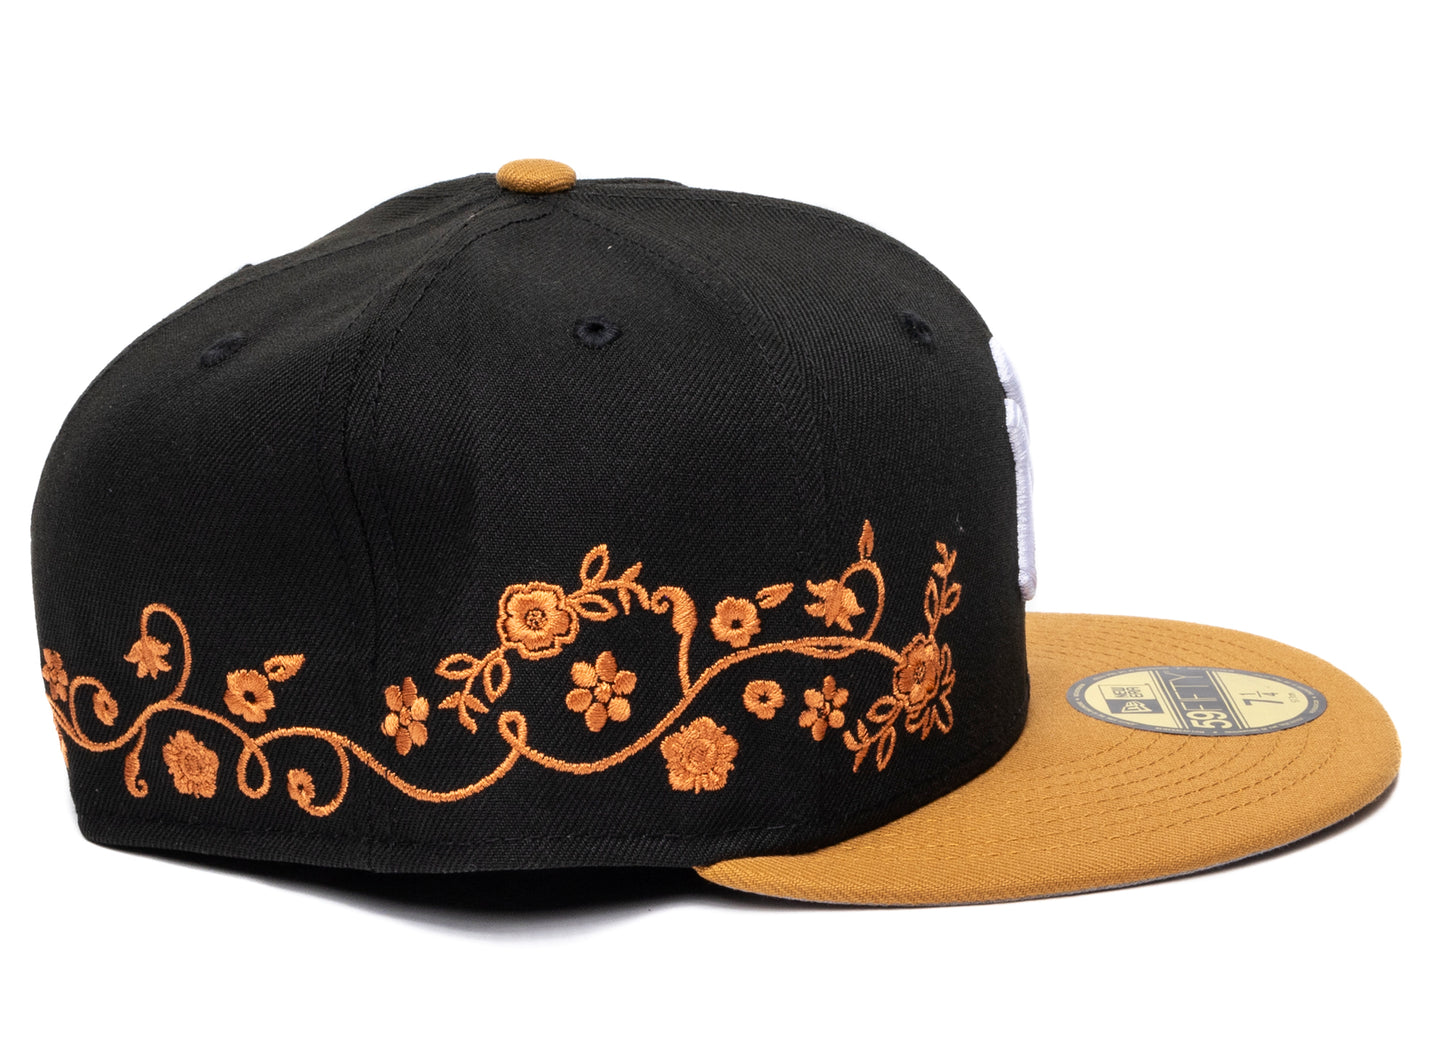 New Era Floral Vine New York Yankees Fitted Hat xld